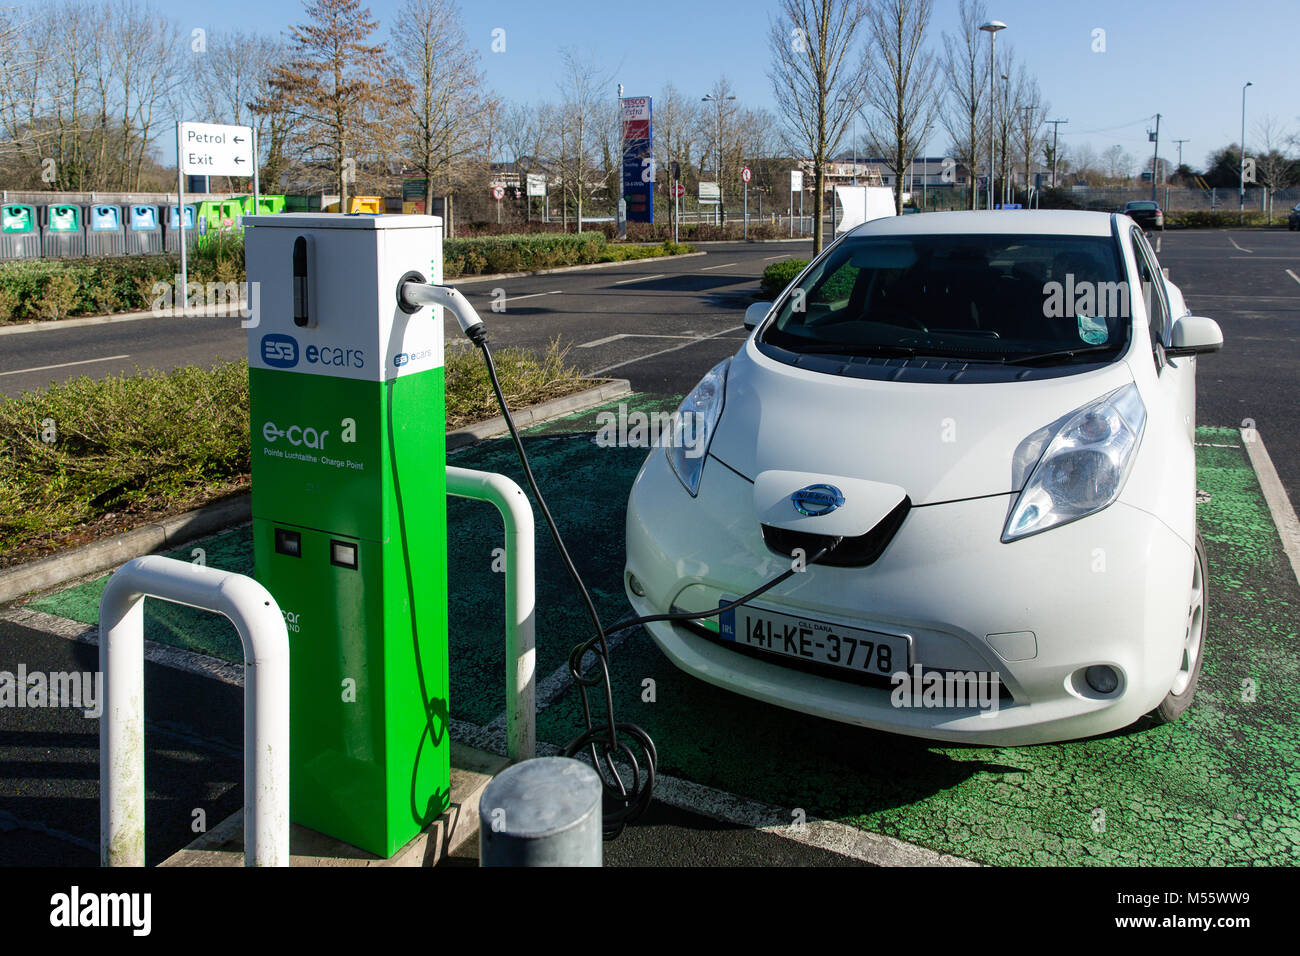 Maynooth, County Kildare, Ireland. 20 Feb 2018: Electric vehicle Ecar Nissan Note being charged at the ESB charging point. Charging car battery becoming more and more accessible with increasing number of charge stations now easily found on-street, shopping centres and car parks. Stock Photo